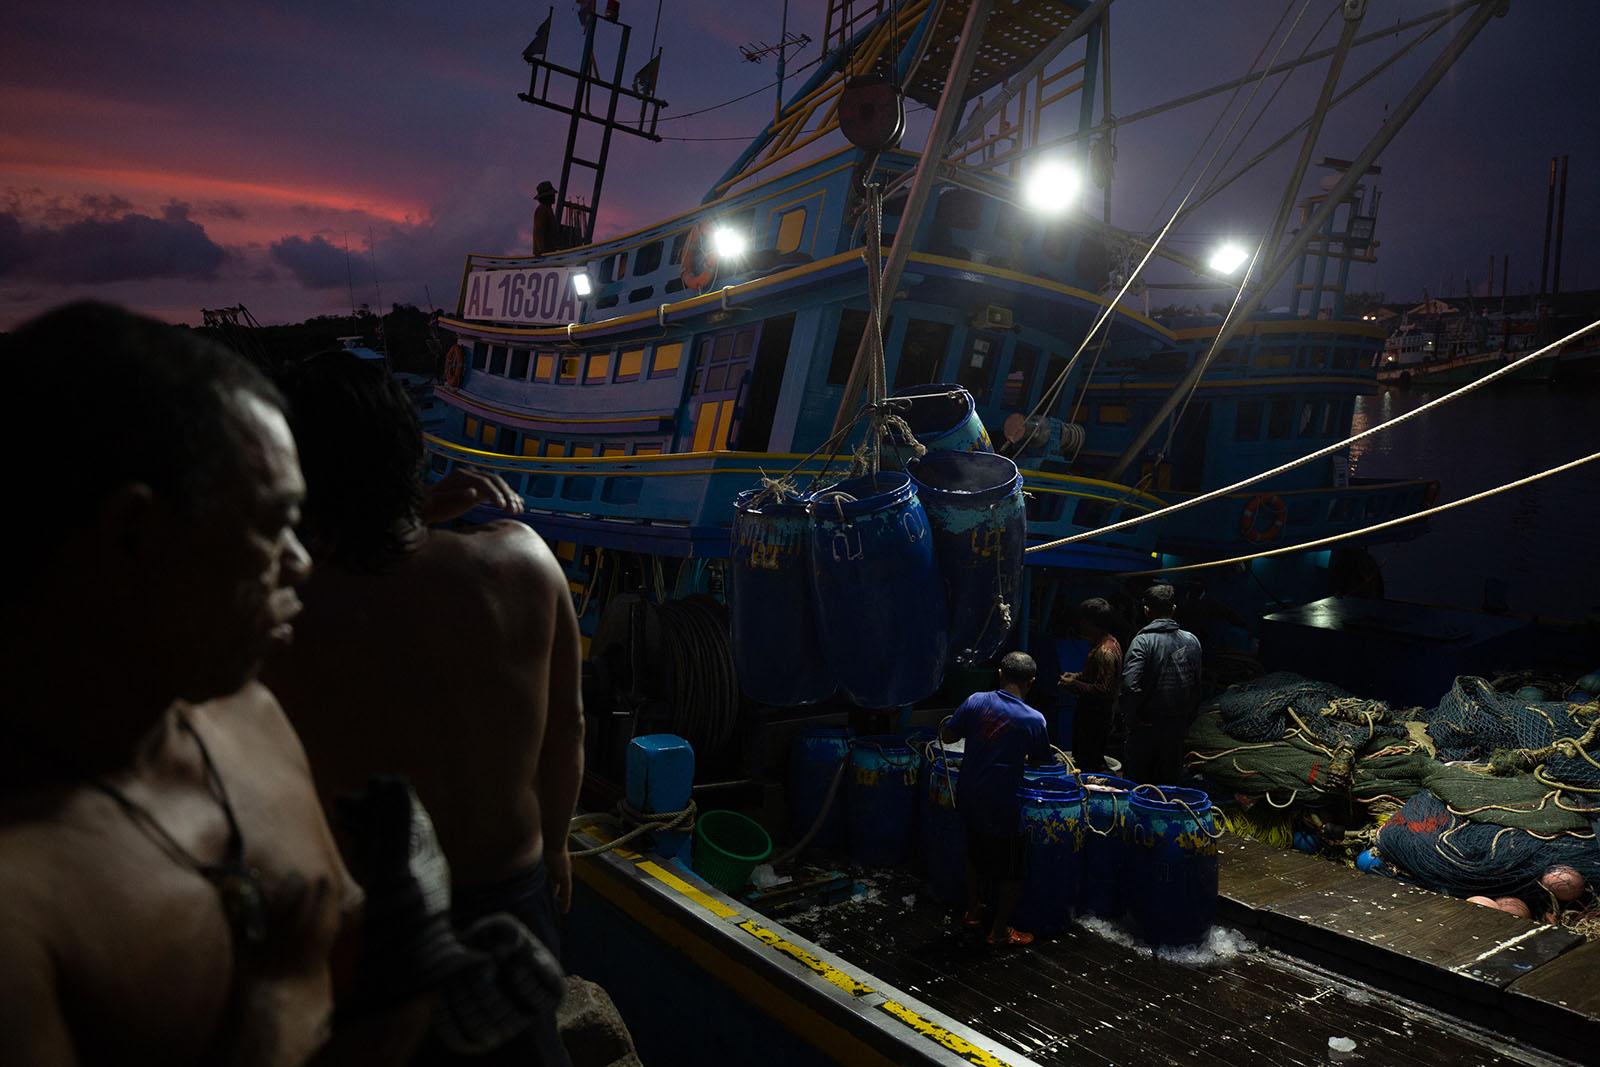 LIFE ON THE OTHER SIDE - Phuket Port, Phuket - At dawn migrant workers from...